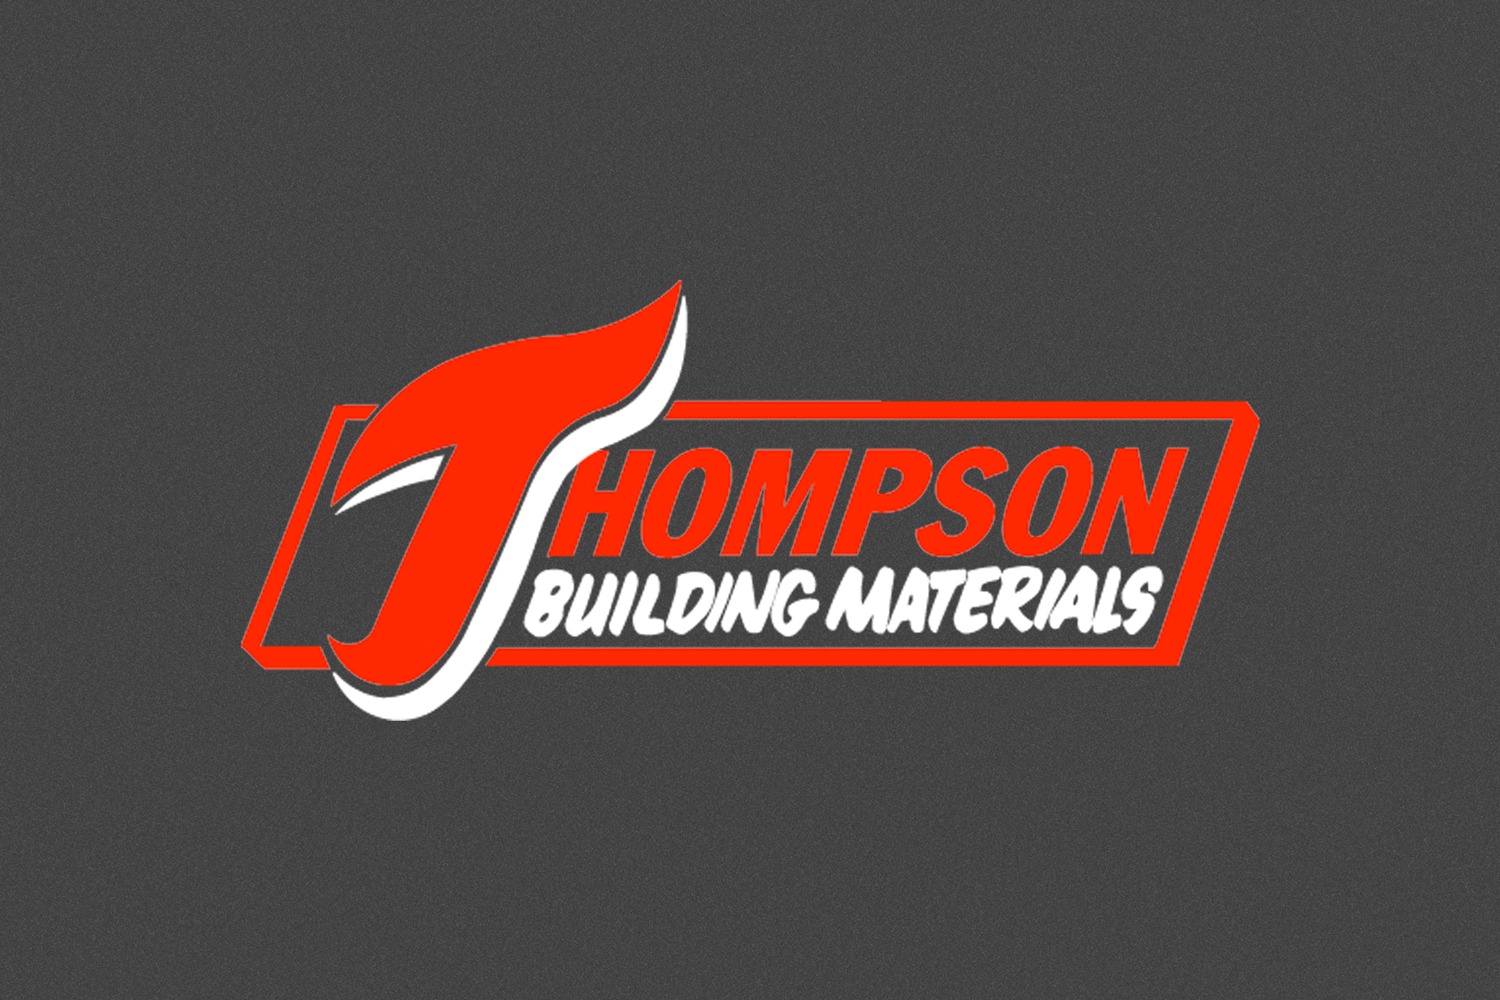 Read our comprehensive review of Thompson's Building Materials, a trusted provider of quality brick, thin brick, natural stone, and pavers. Discover their commitment to sustainable products and their passion for serving builders, architects, contractors, homeowners, and communities. Partner with Gott Marketing for all your marketing needs in the construction industry.